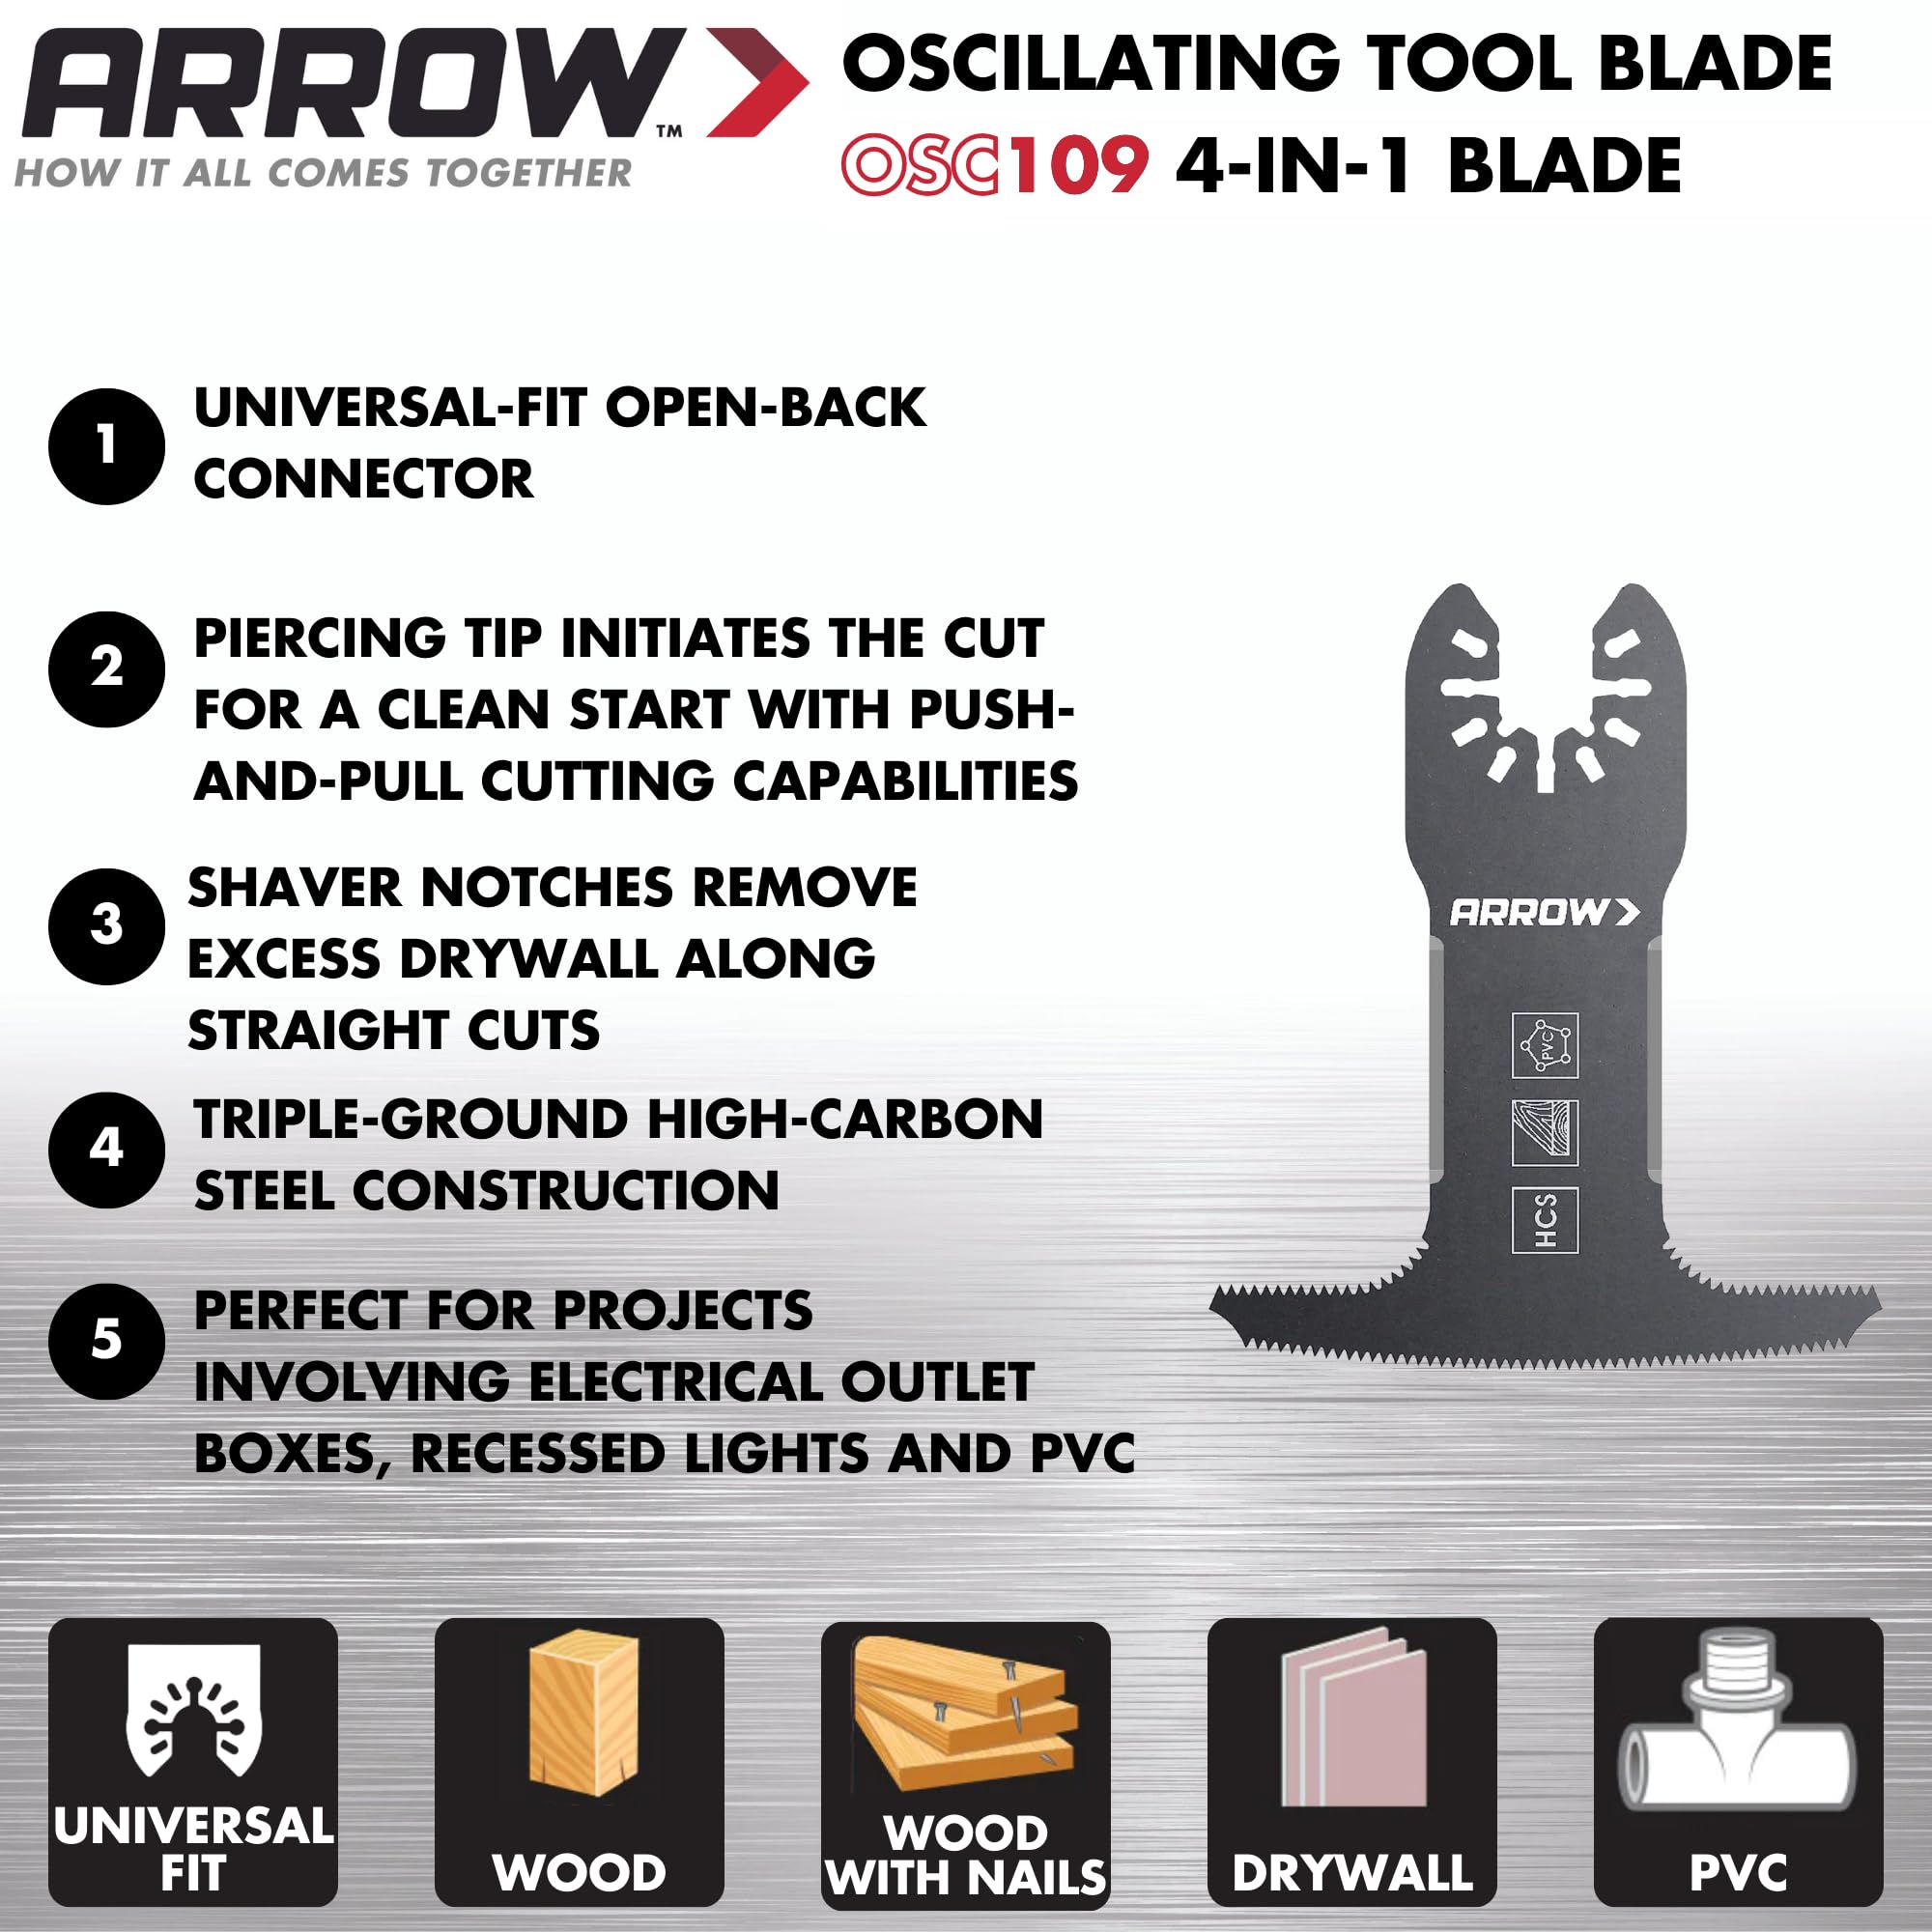 Arrow OSC109-1, 4-IN-1 Drywall Oscillating Tool Blade for Electrical Outlet Boxes, Recessed Lights, PVC, Universal, Fits Most Multitools